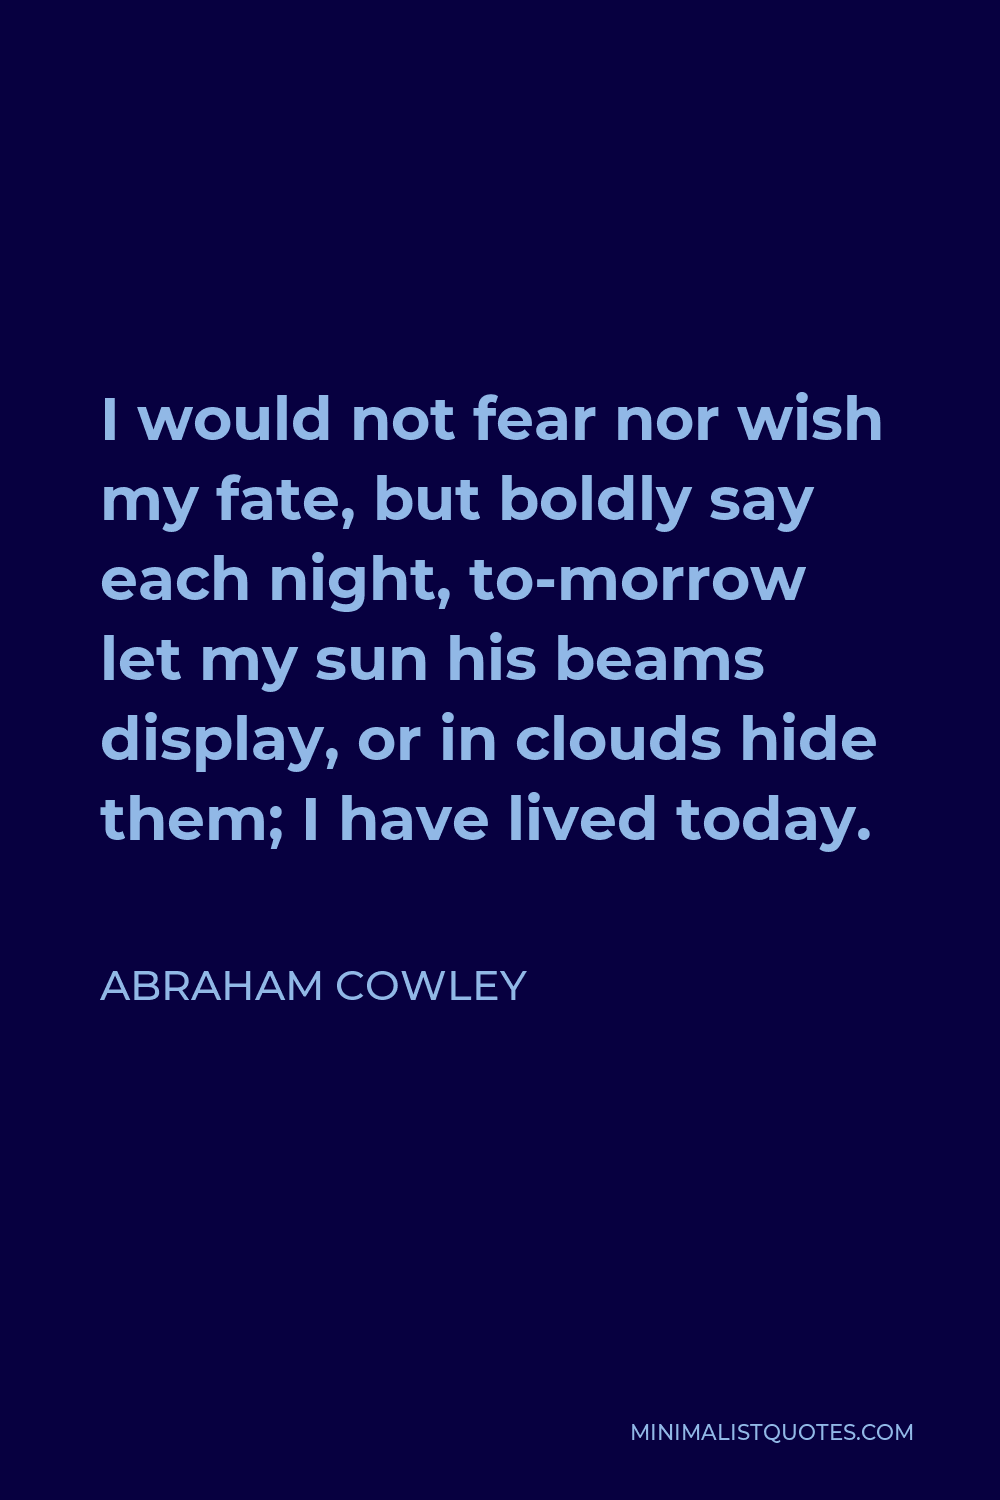 Abraham Cowley Quote - I would not fear nor wish my fate, but boldly say each night, to-morrow let my sun his beams display, or in clouds hide them; I have lived today.